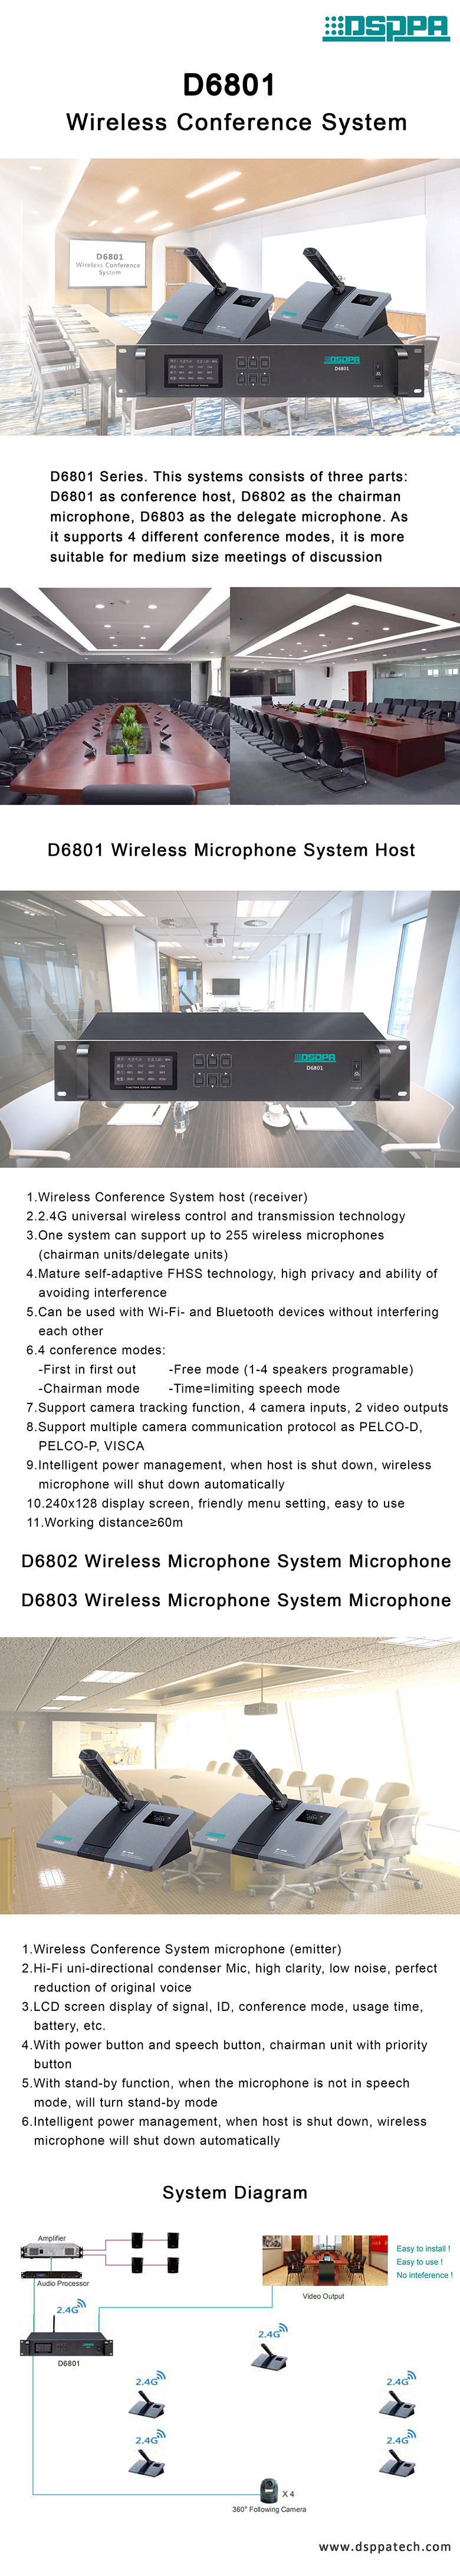 D6801 Simple Wireless Conference System